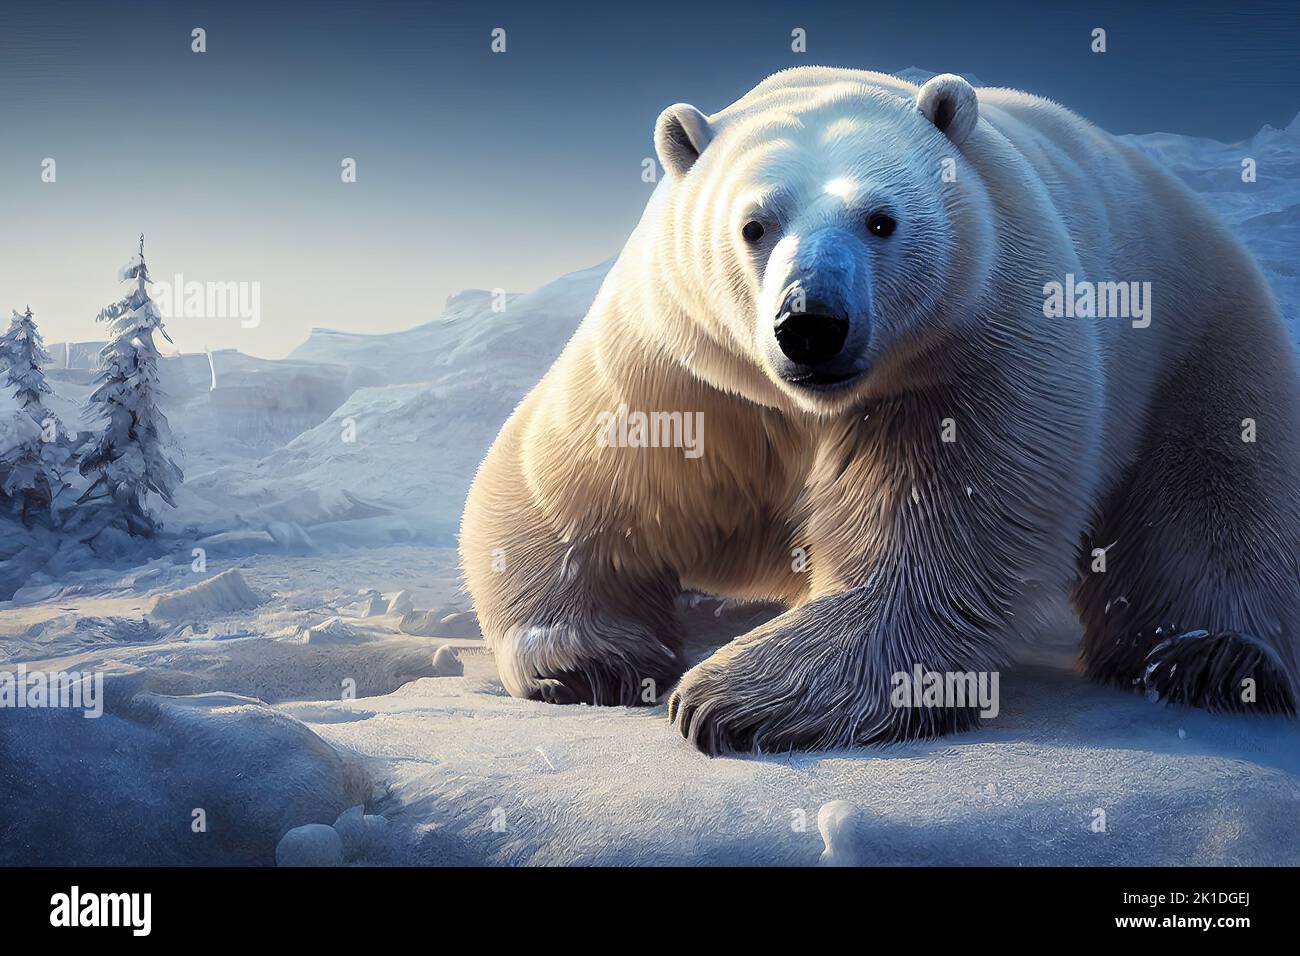 A white bear on snow in a frosty forest scene. A polar bear on snow in an Antarctic ecosystem. An image of wildlife in nature and animal behavior in Stock Photo